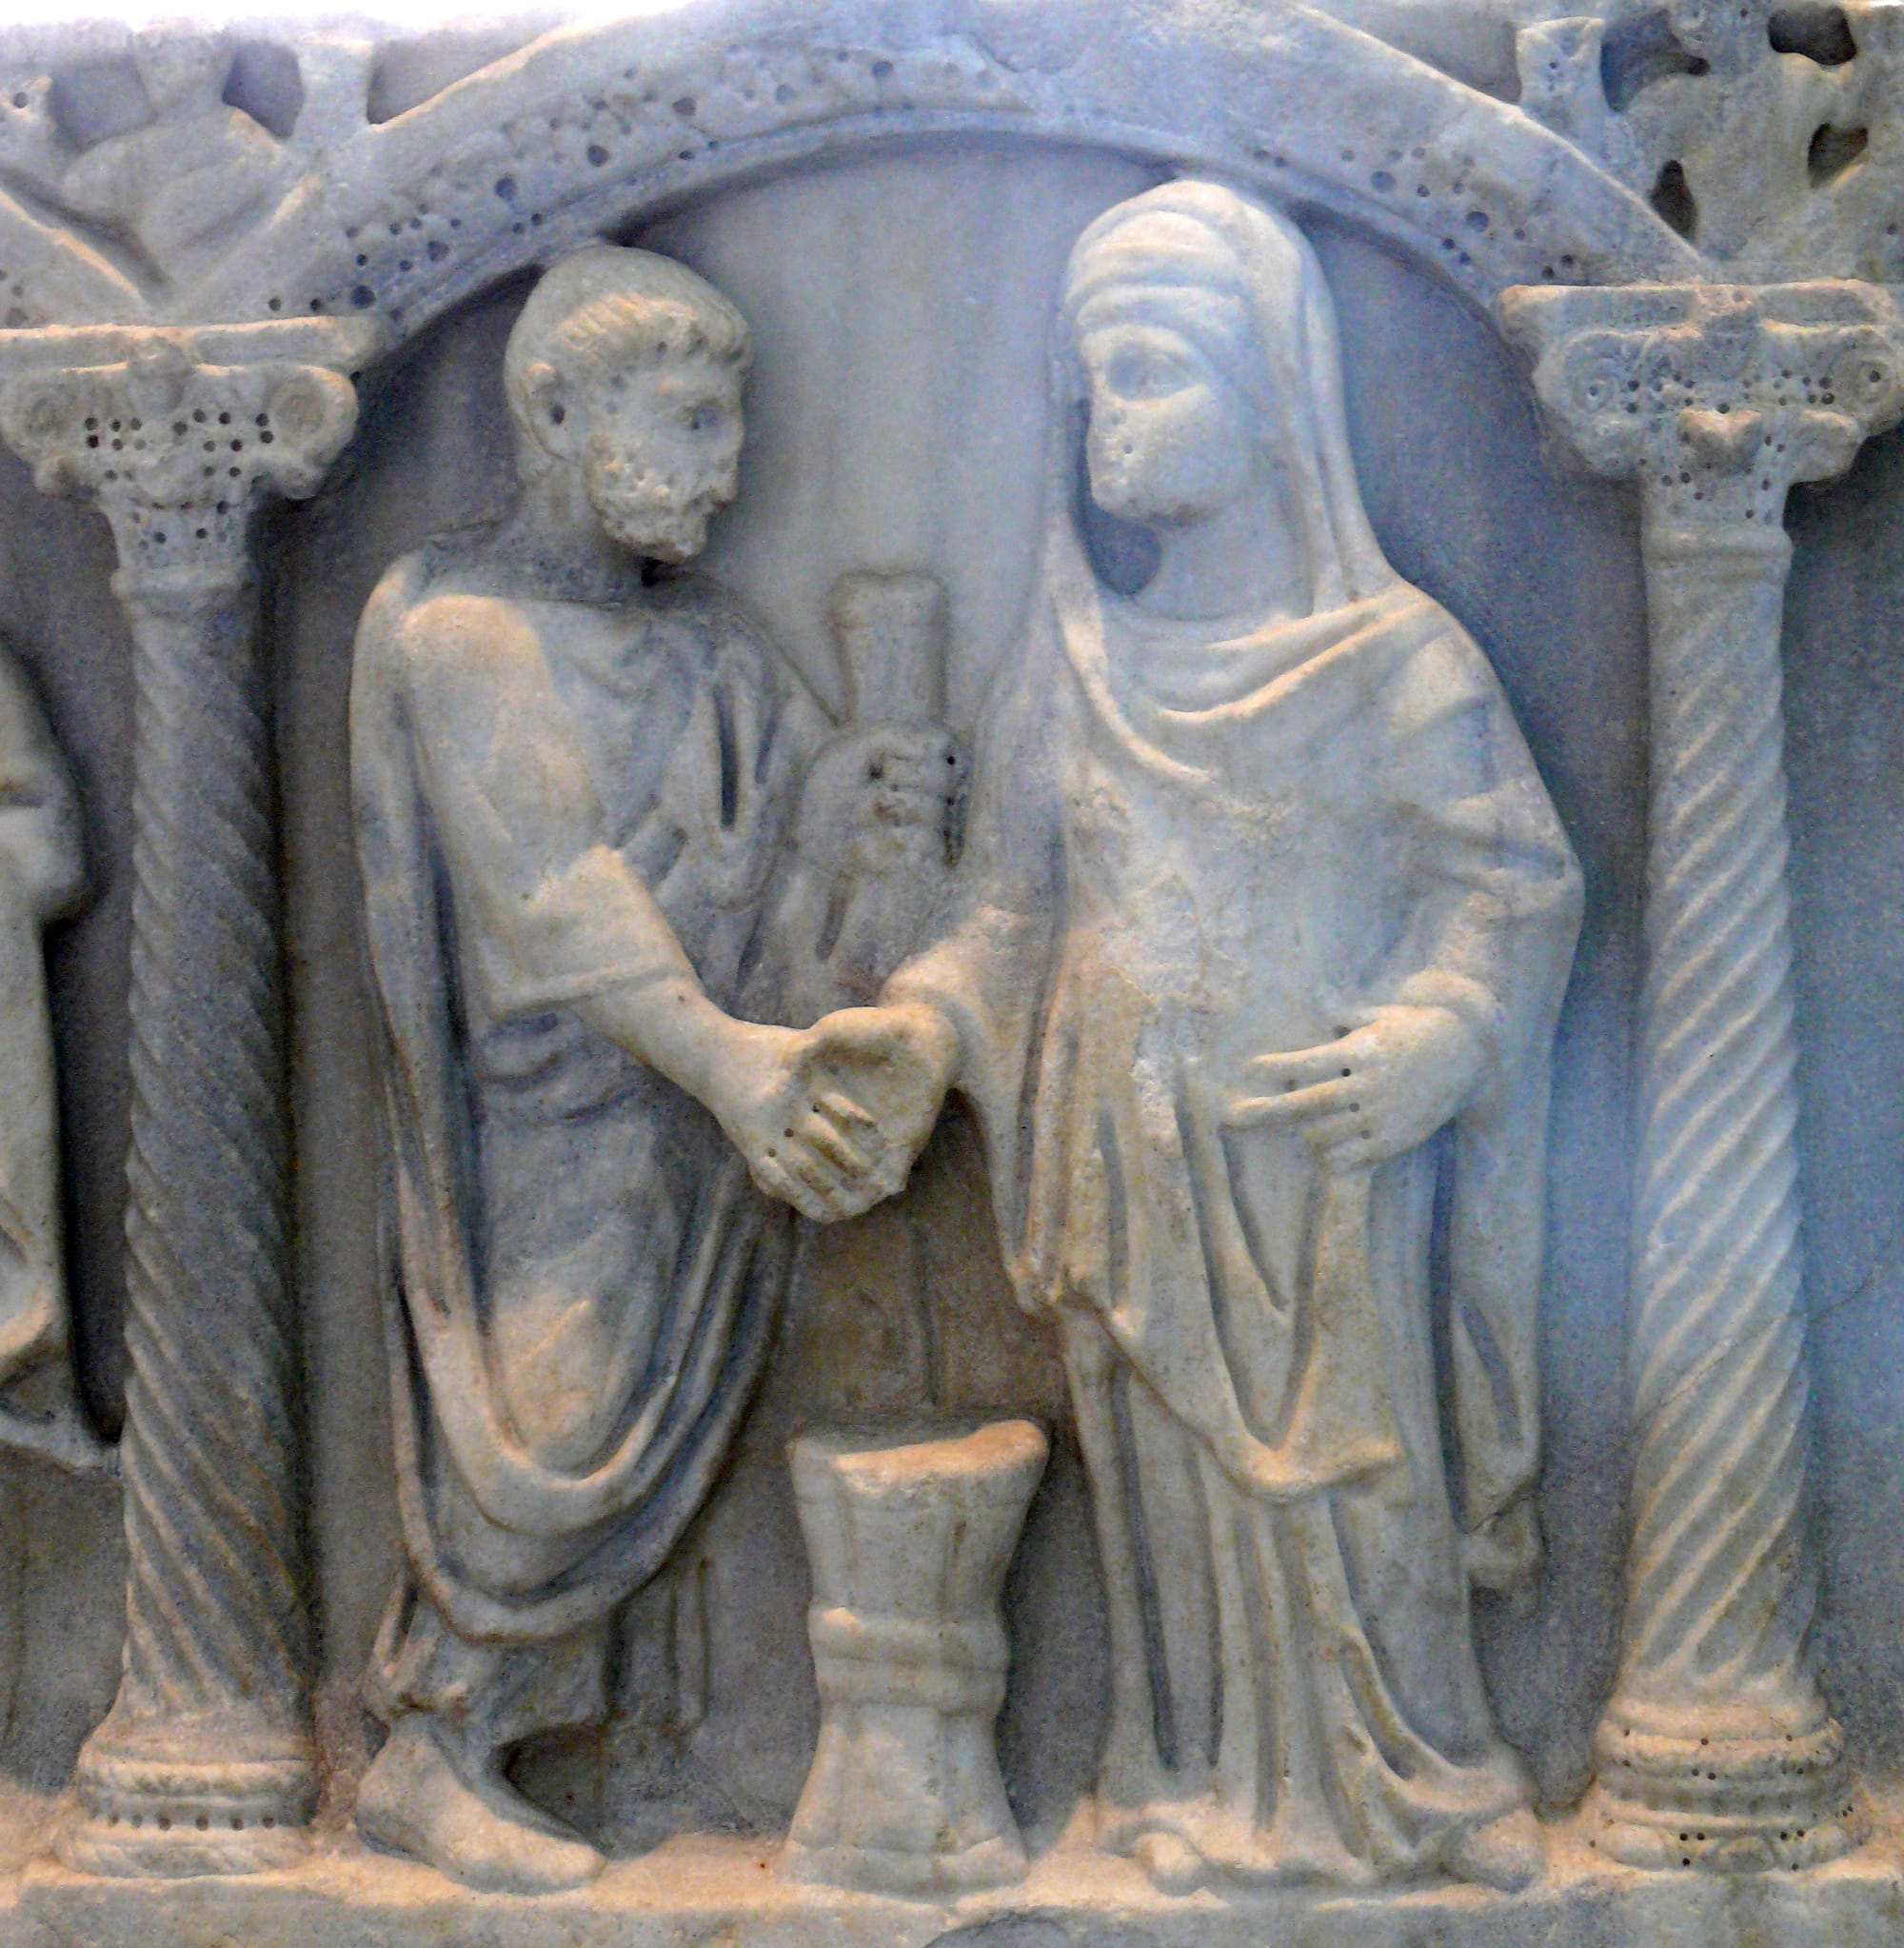 Roman couple joining hands (dextrarum iunctio); the bride's belt may show the knot symbolizing that the husband was "belted and bound" to her, which he was to untie in their bed (4th century sarcophagus).